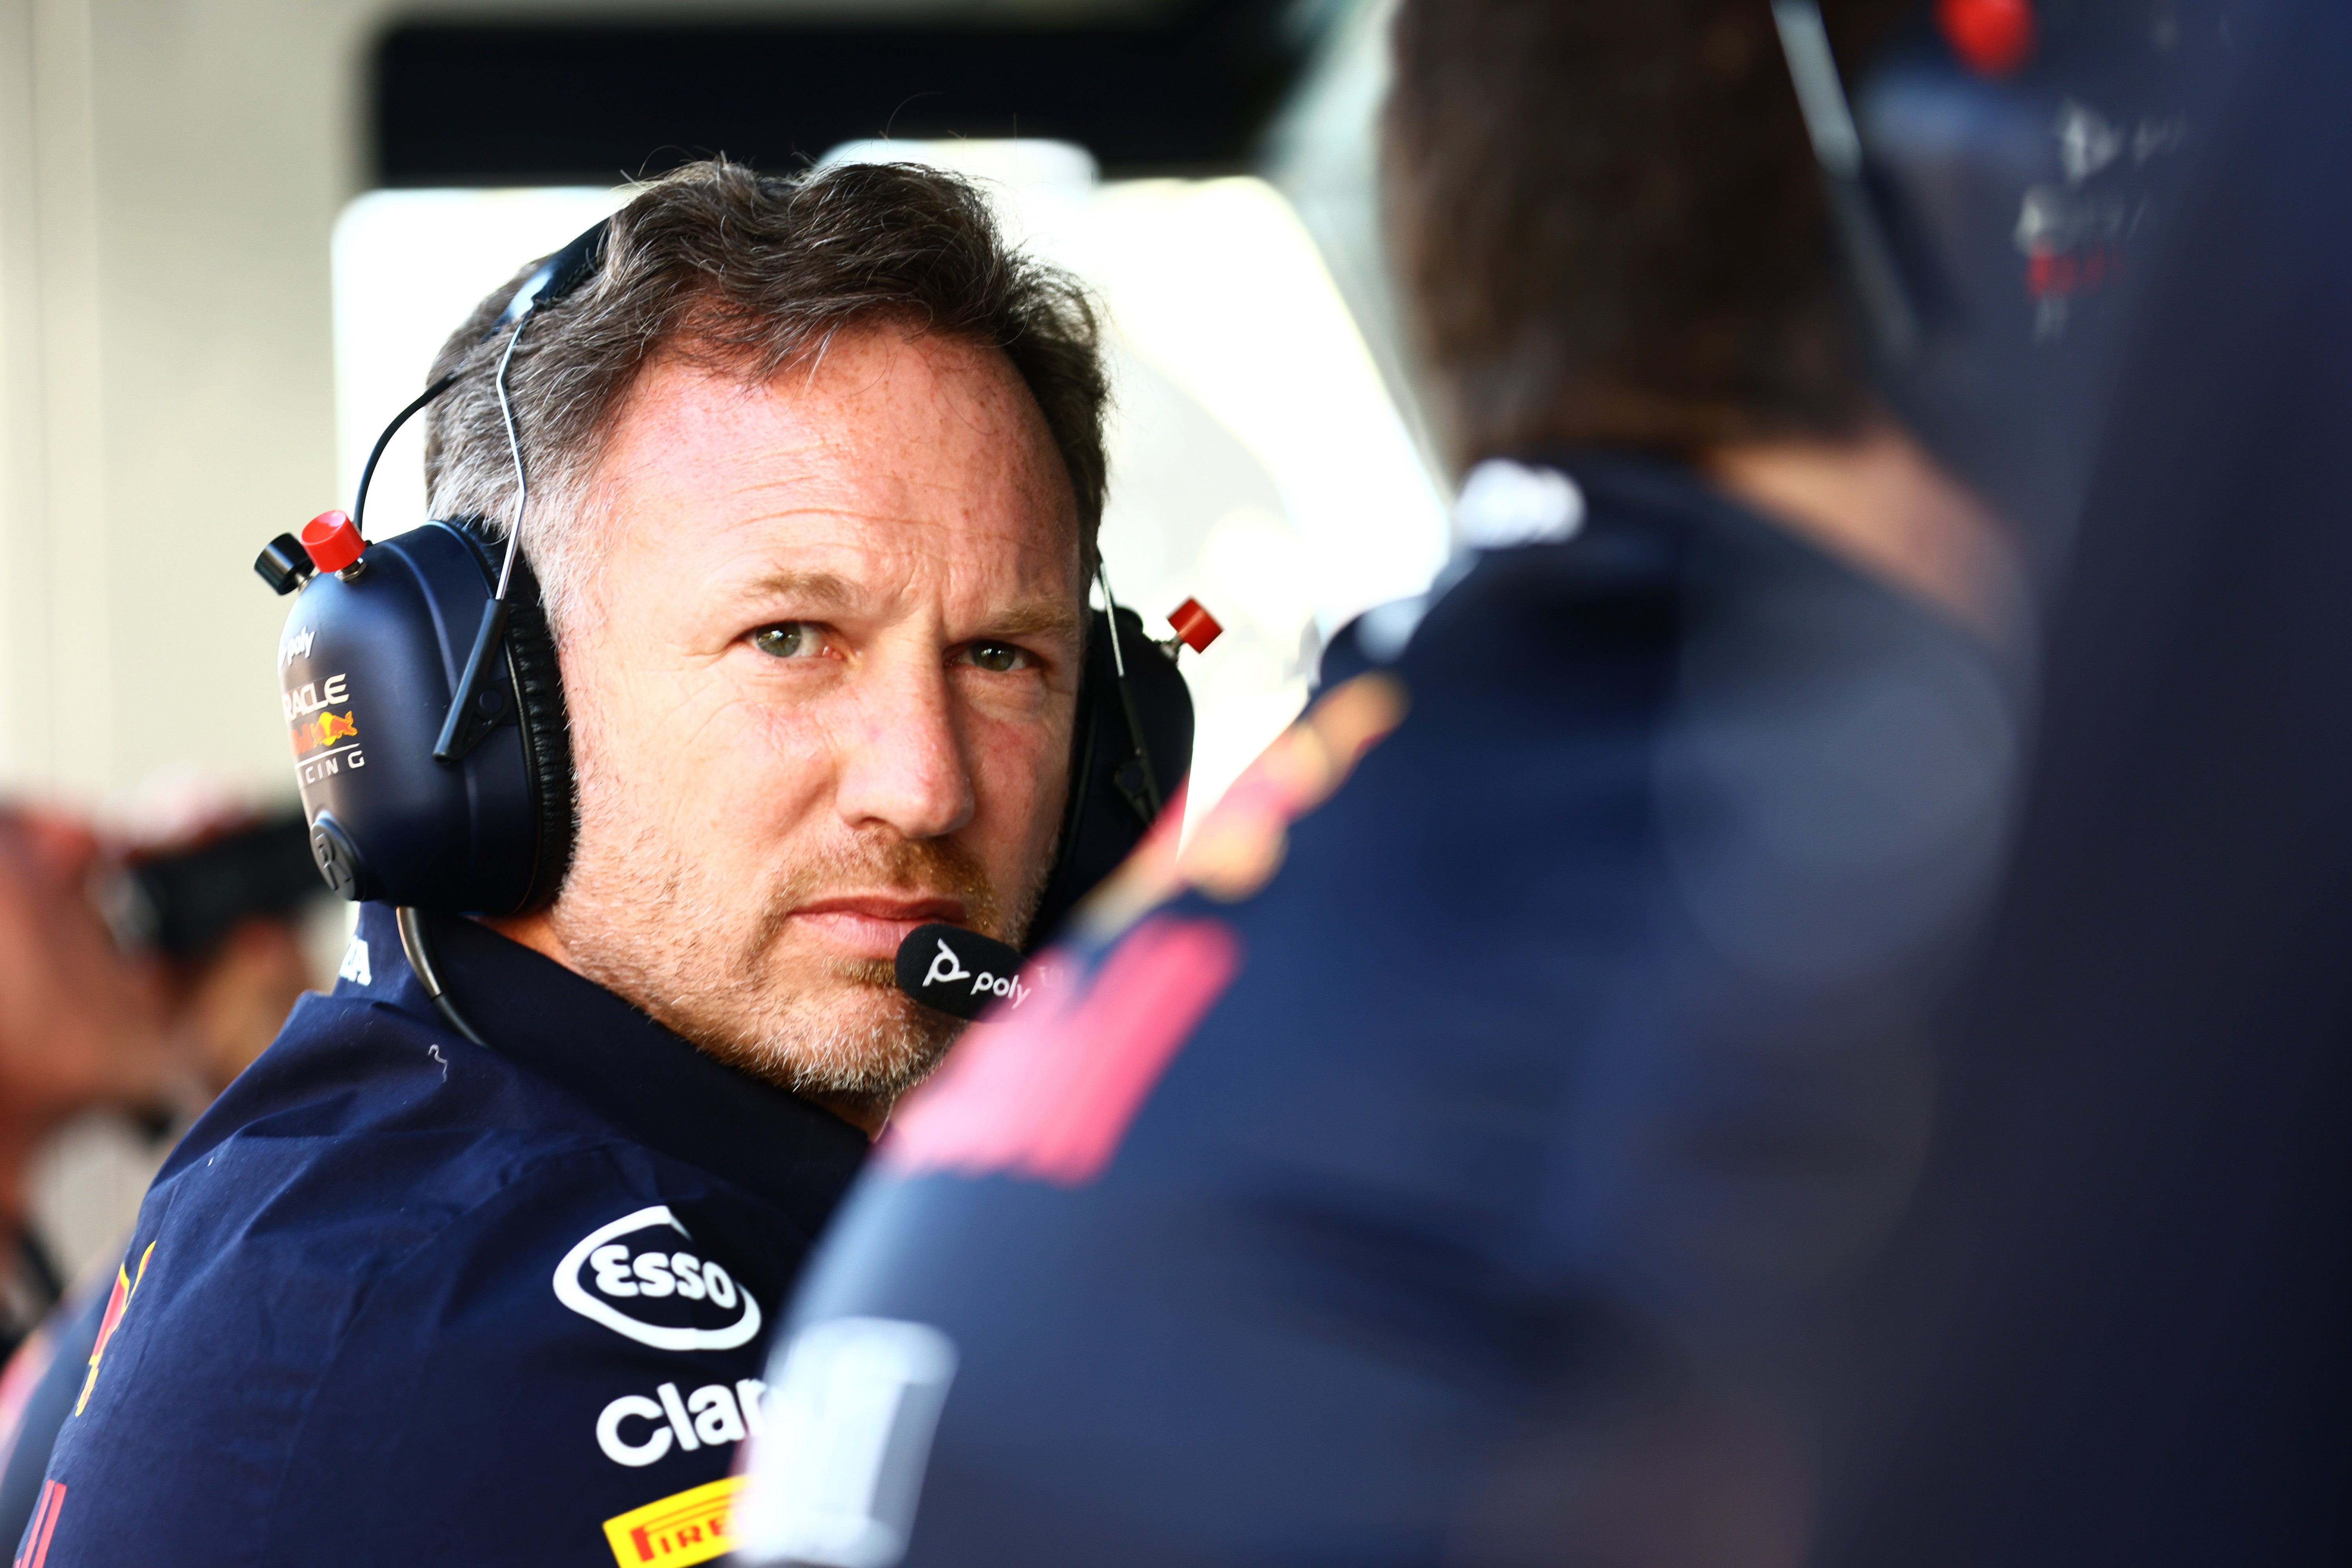 Christian Horner and his Red Bull team were left ruing reliability once again in Australia.